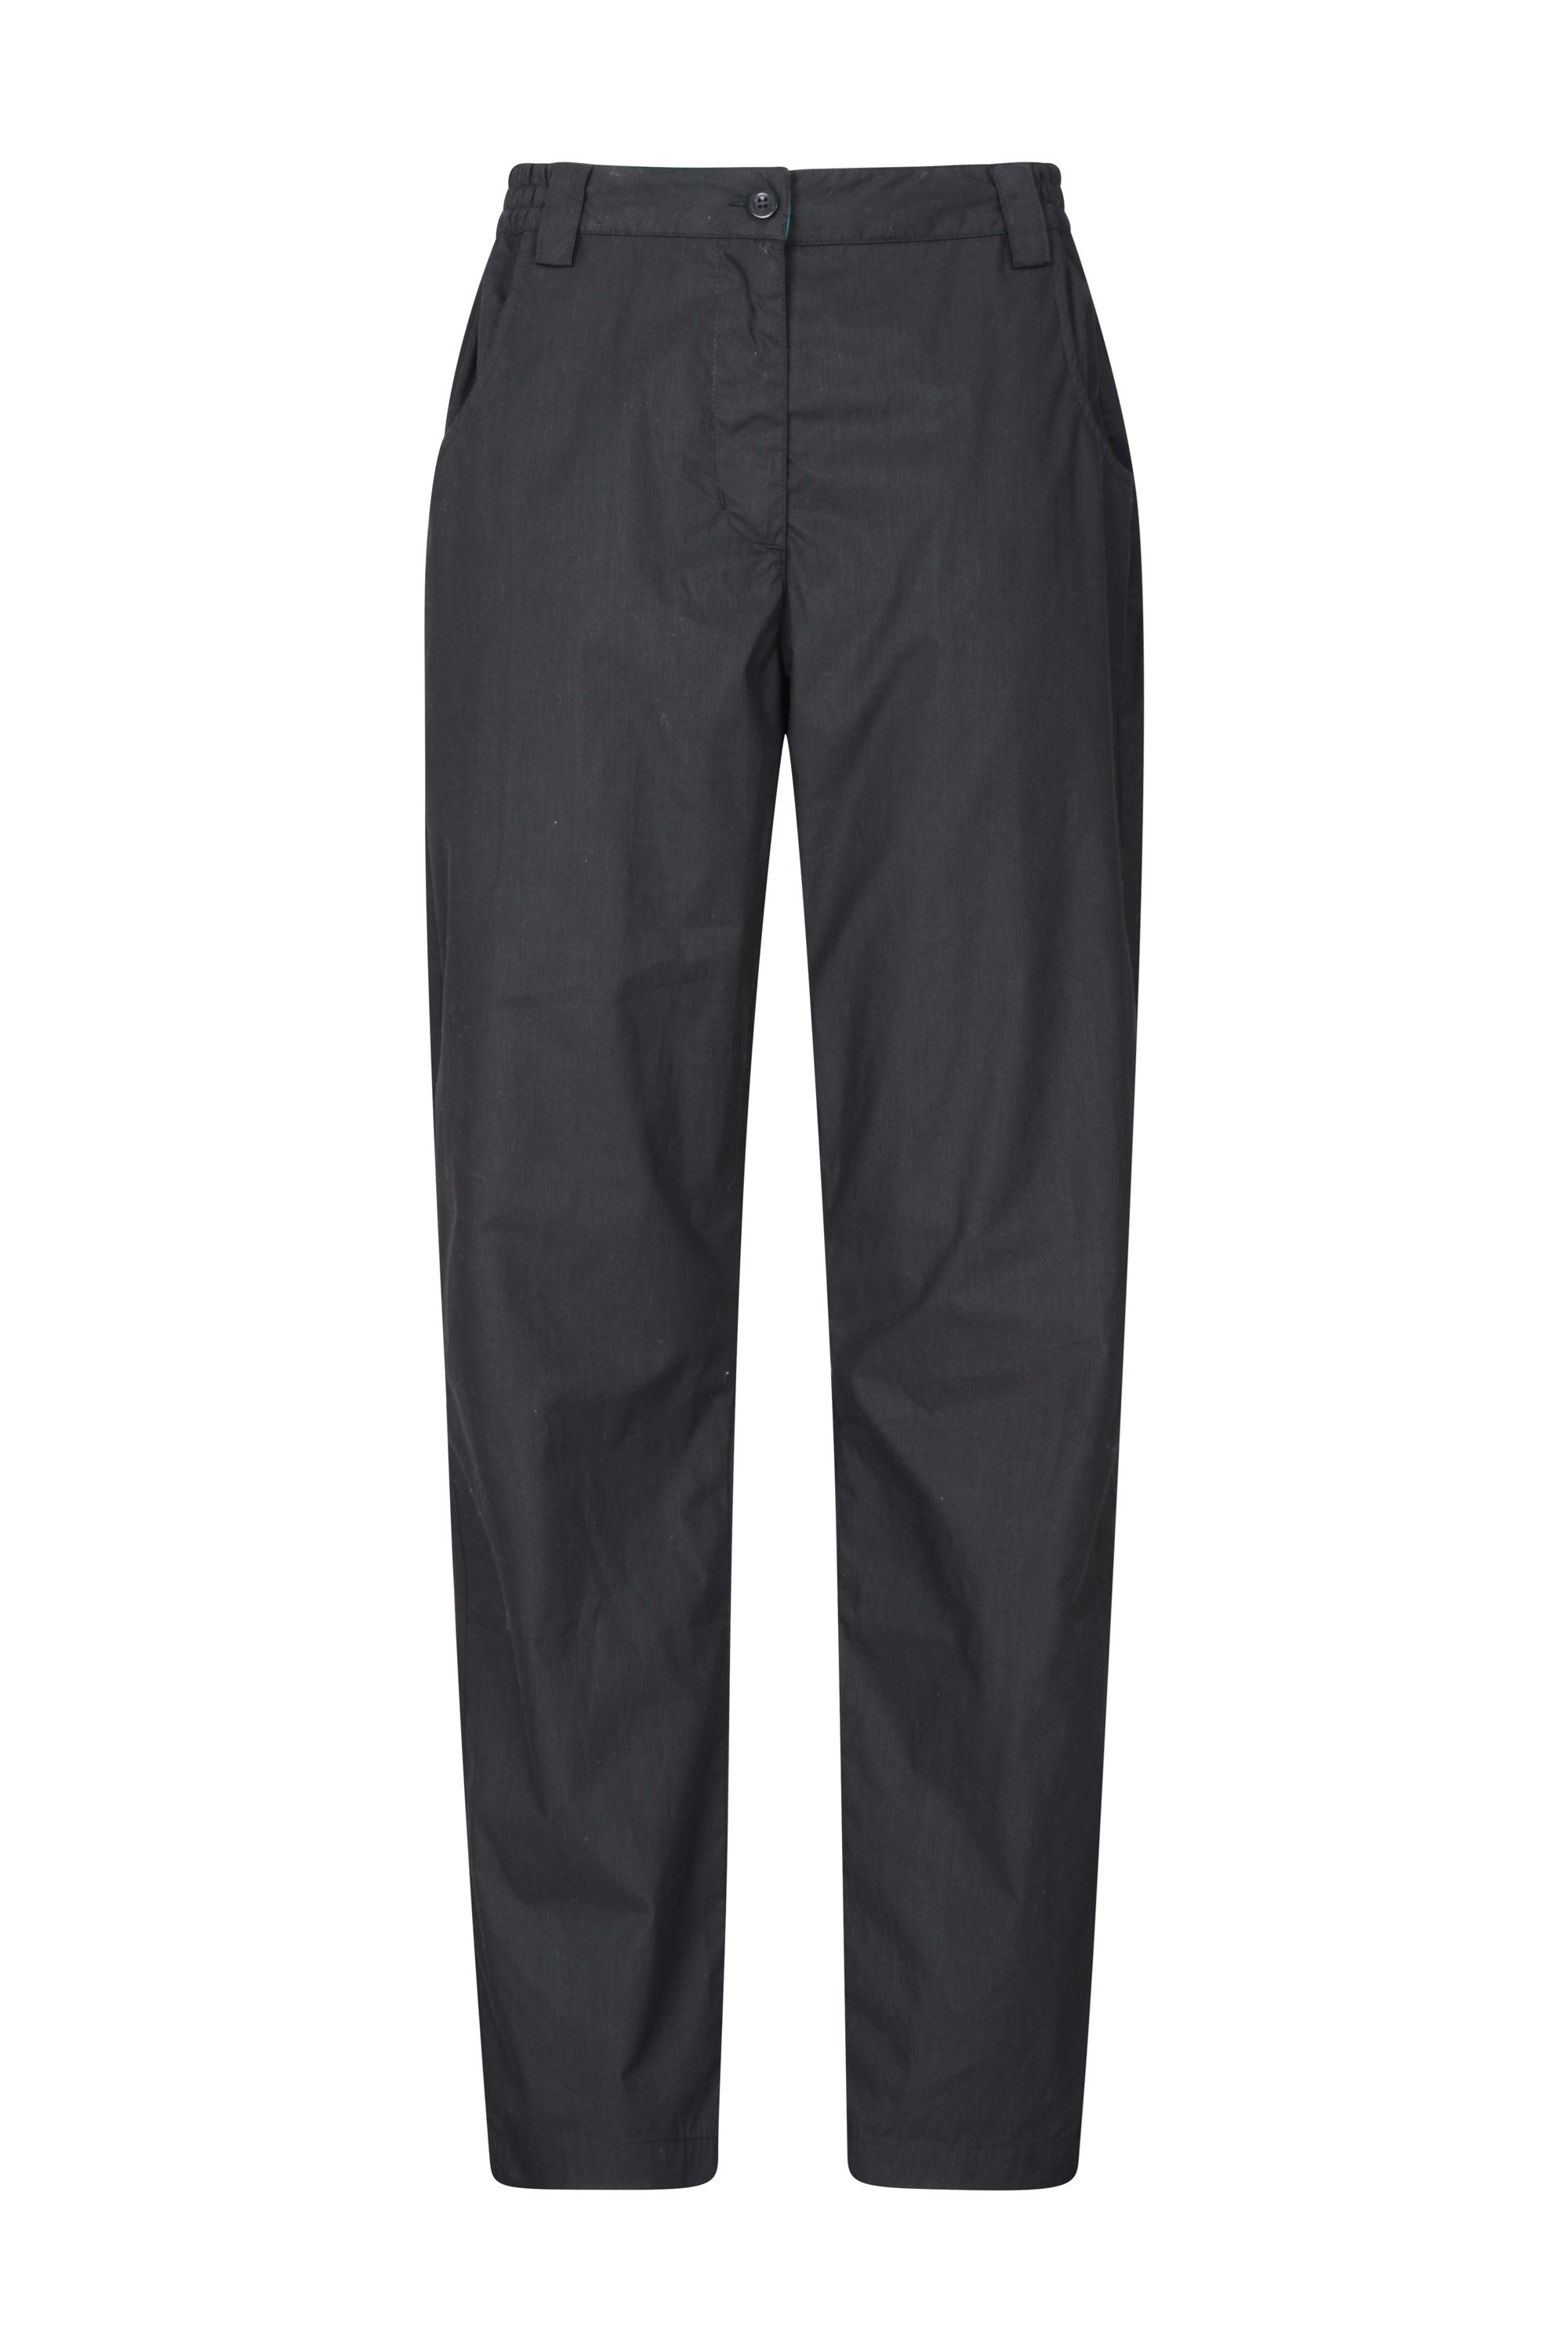 Quest Womens Walking Trousers - Extra Short Length - Black